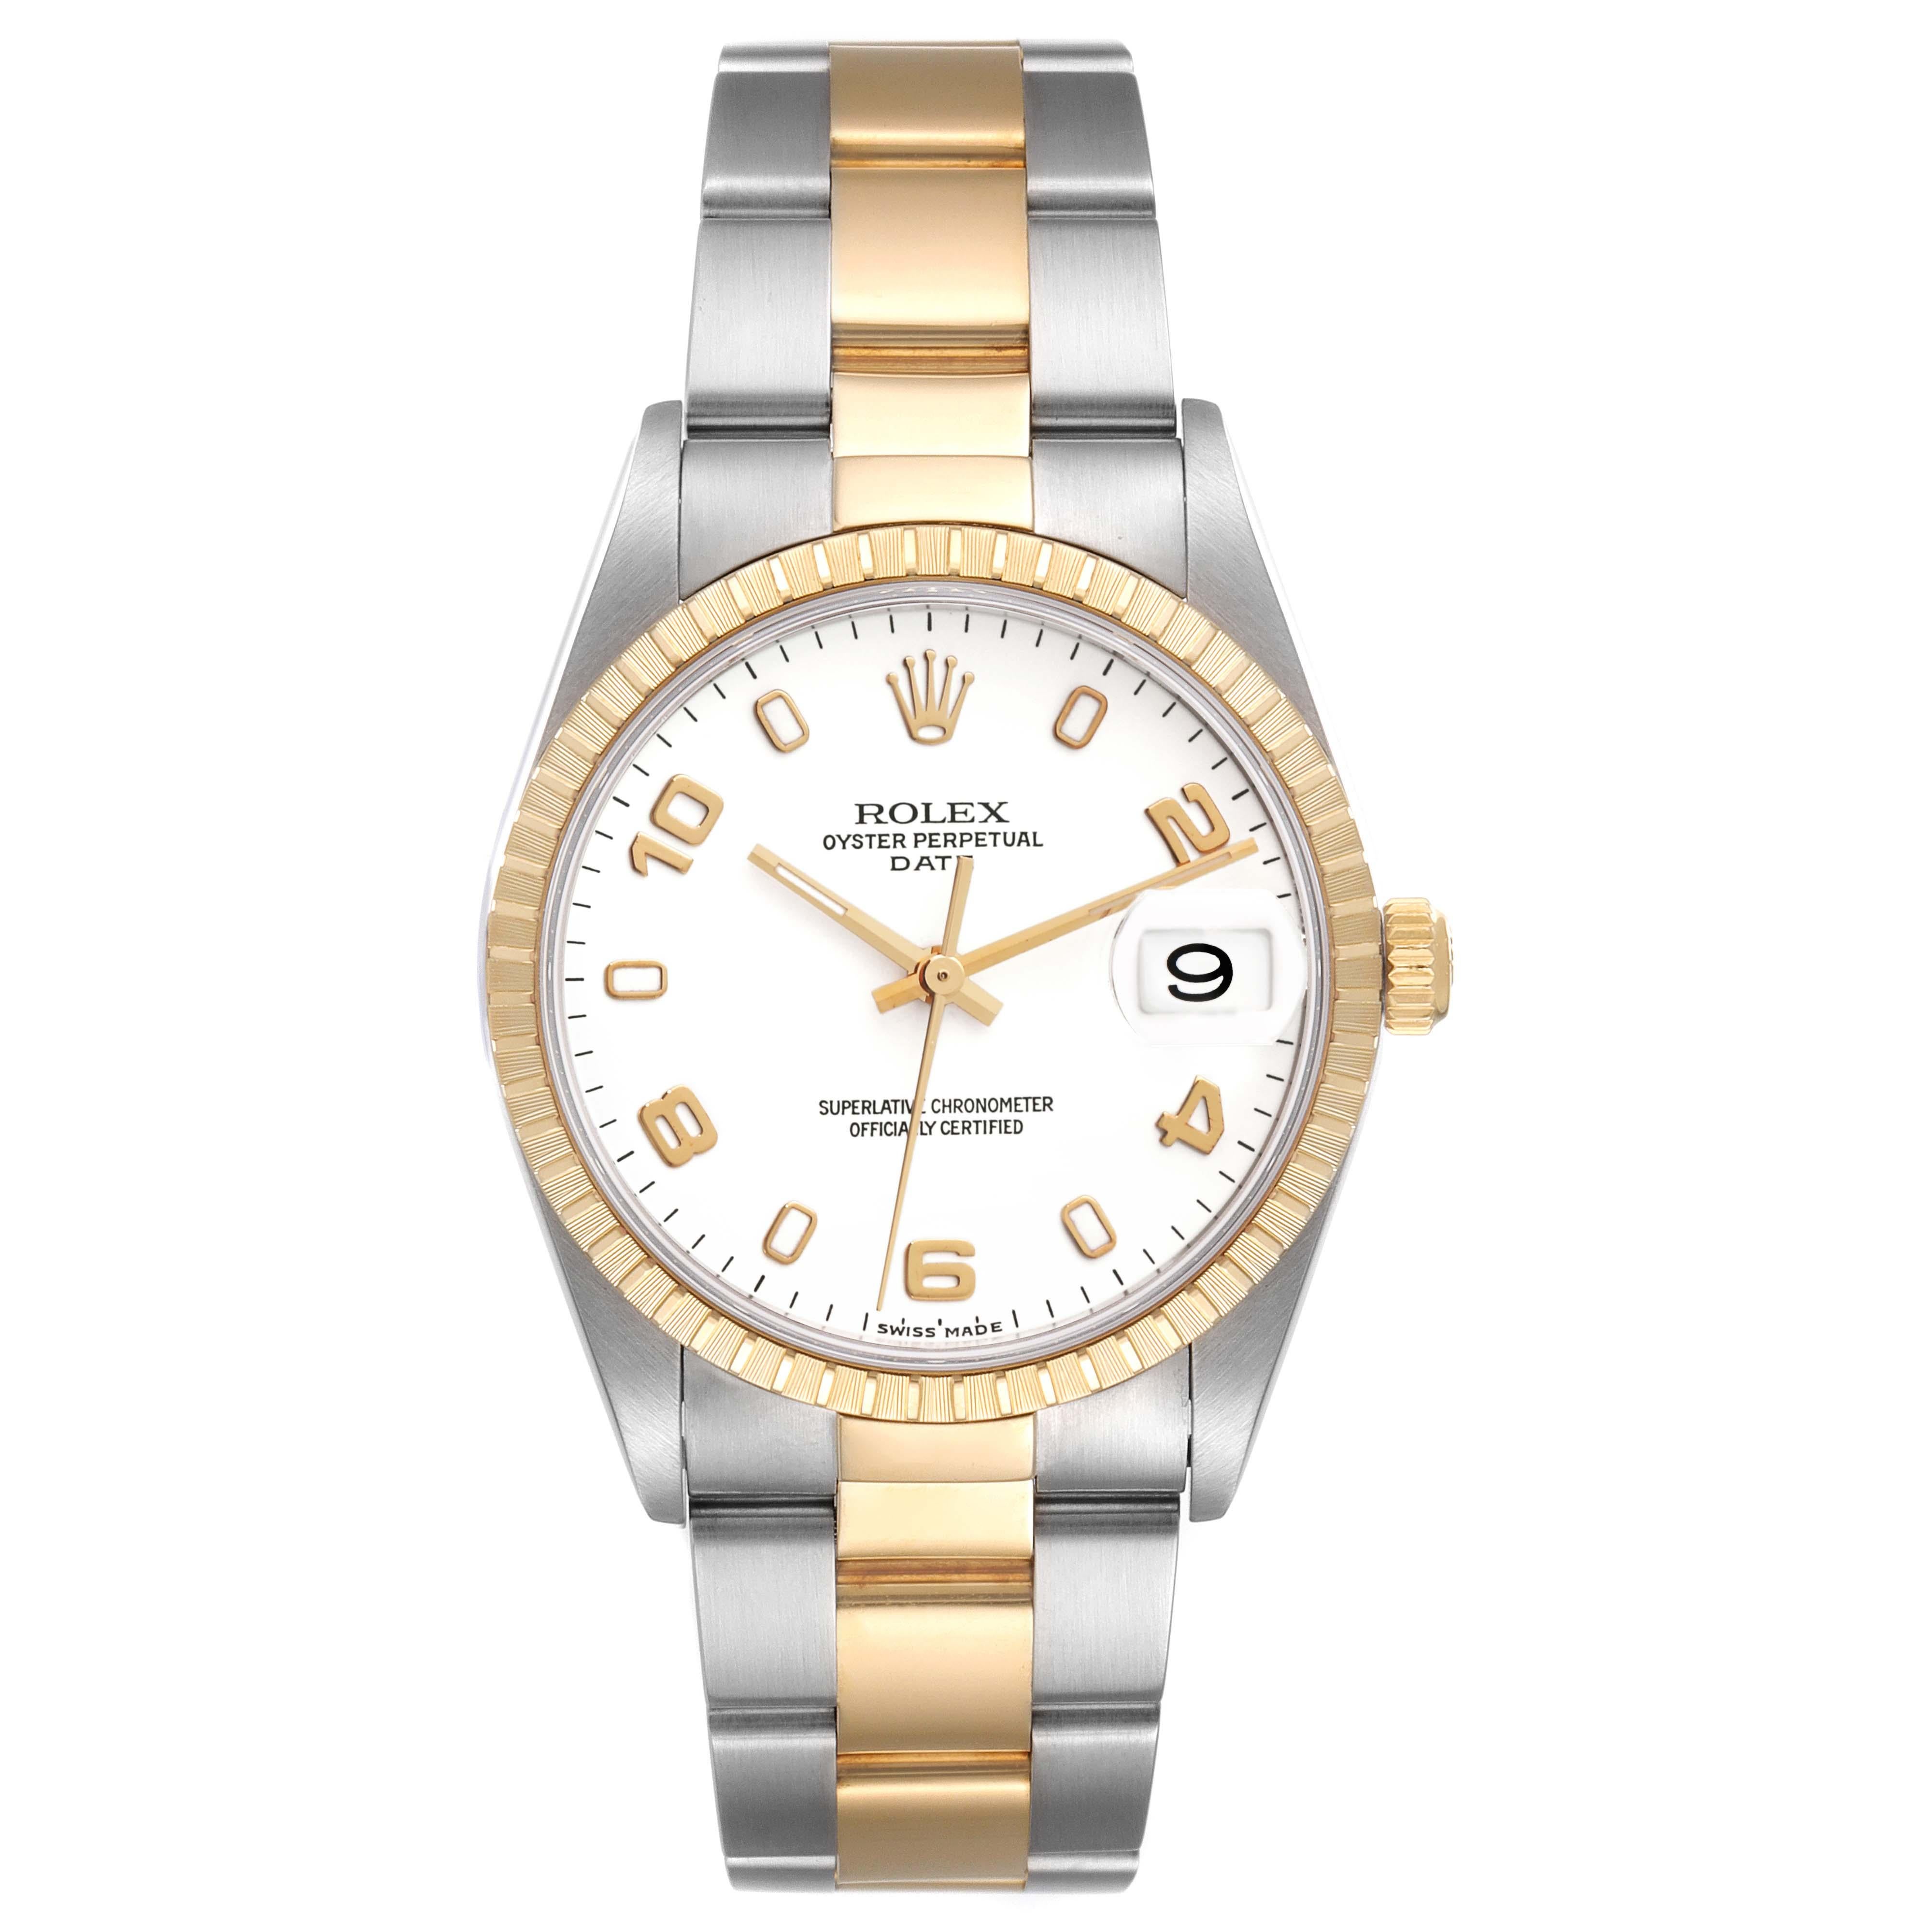 Rolex Date Steel Yellow Gold White Dial Mens Watch 15223. Officially certified chronometer self-winding movement with quickset date function. Stainless steel and 18K yellow gold oyster case 34.0 mm in diameter. Rolex logo on a crown. 18K yellow gold